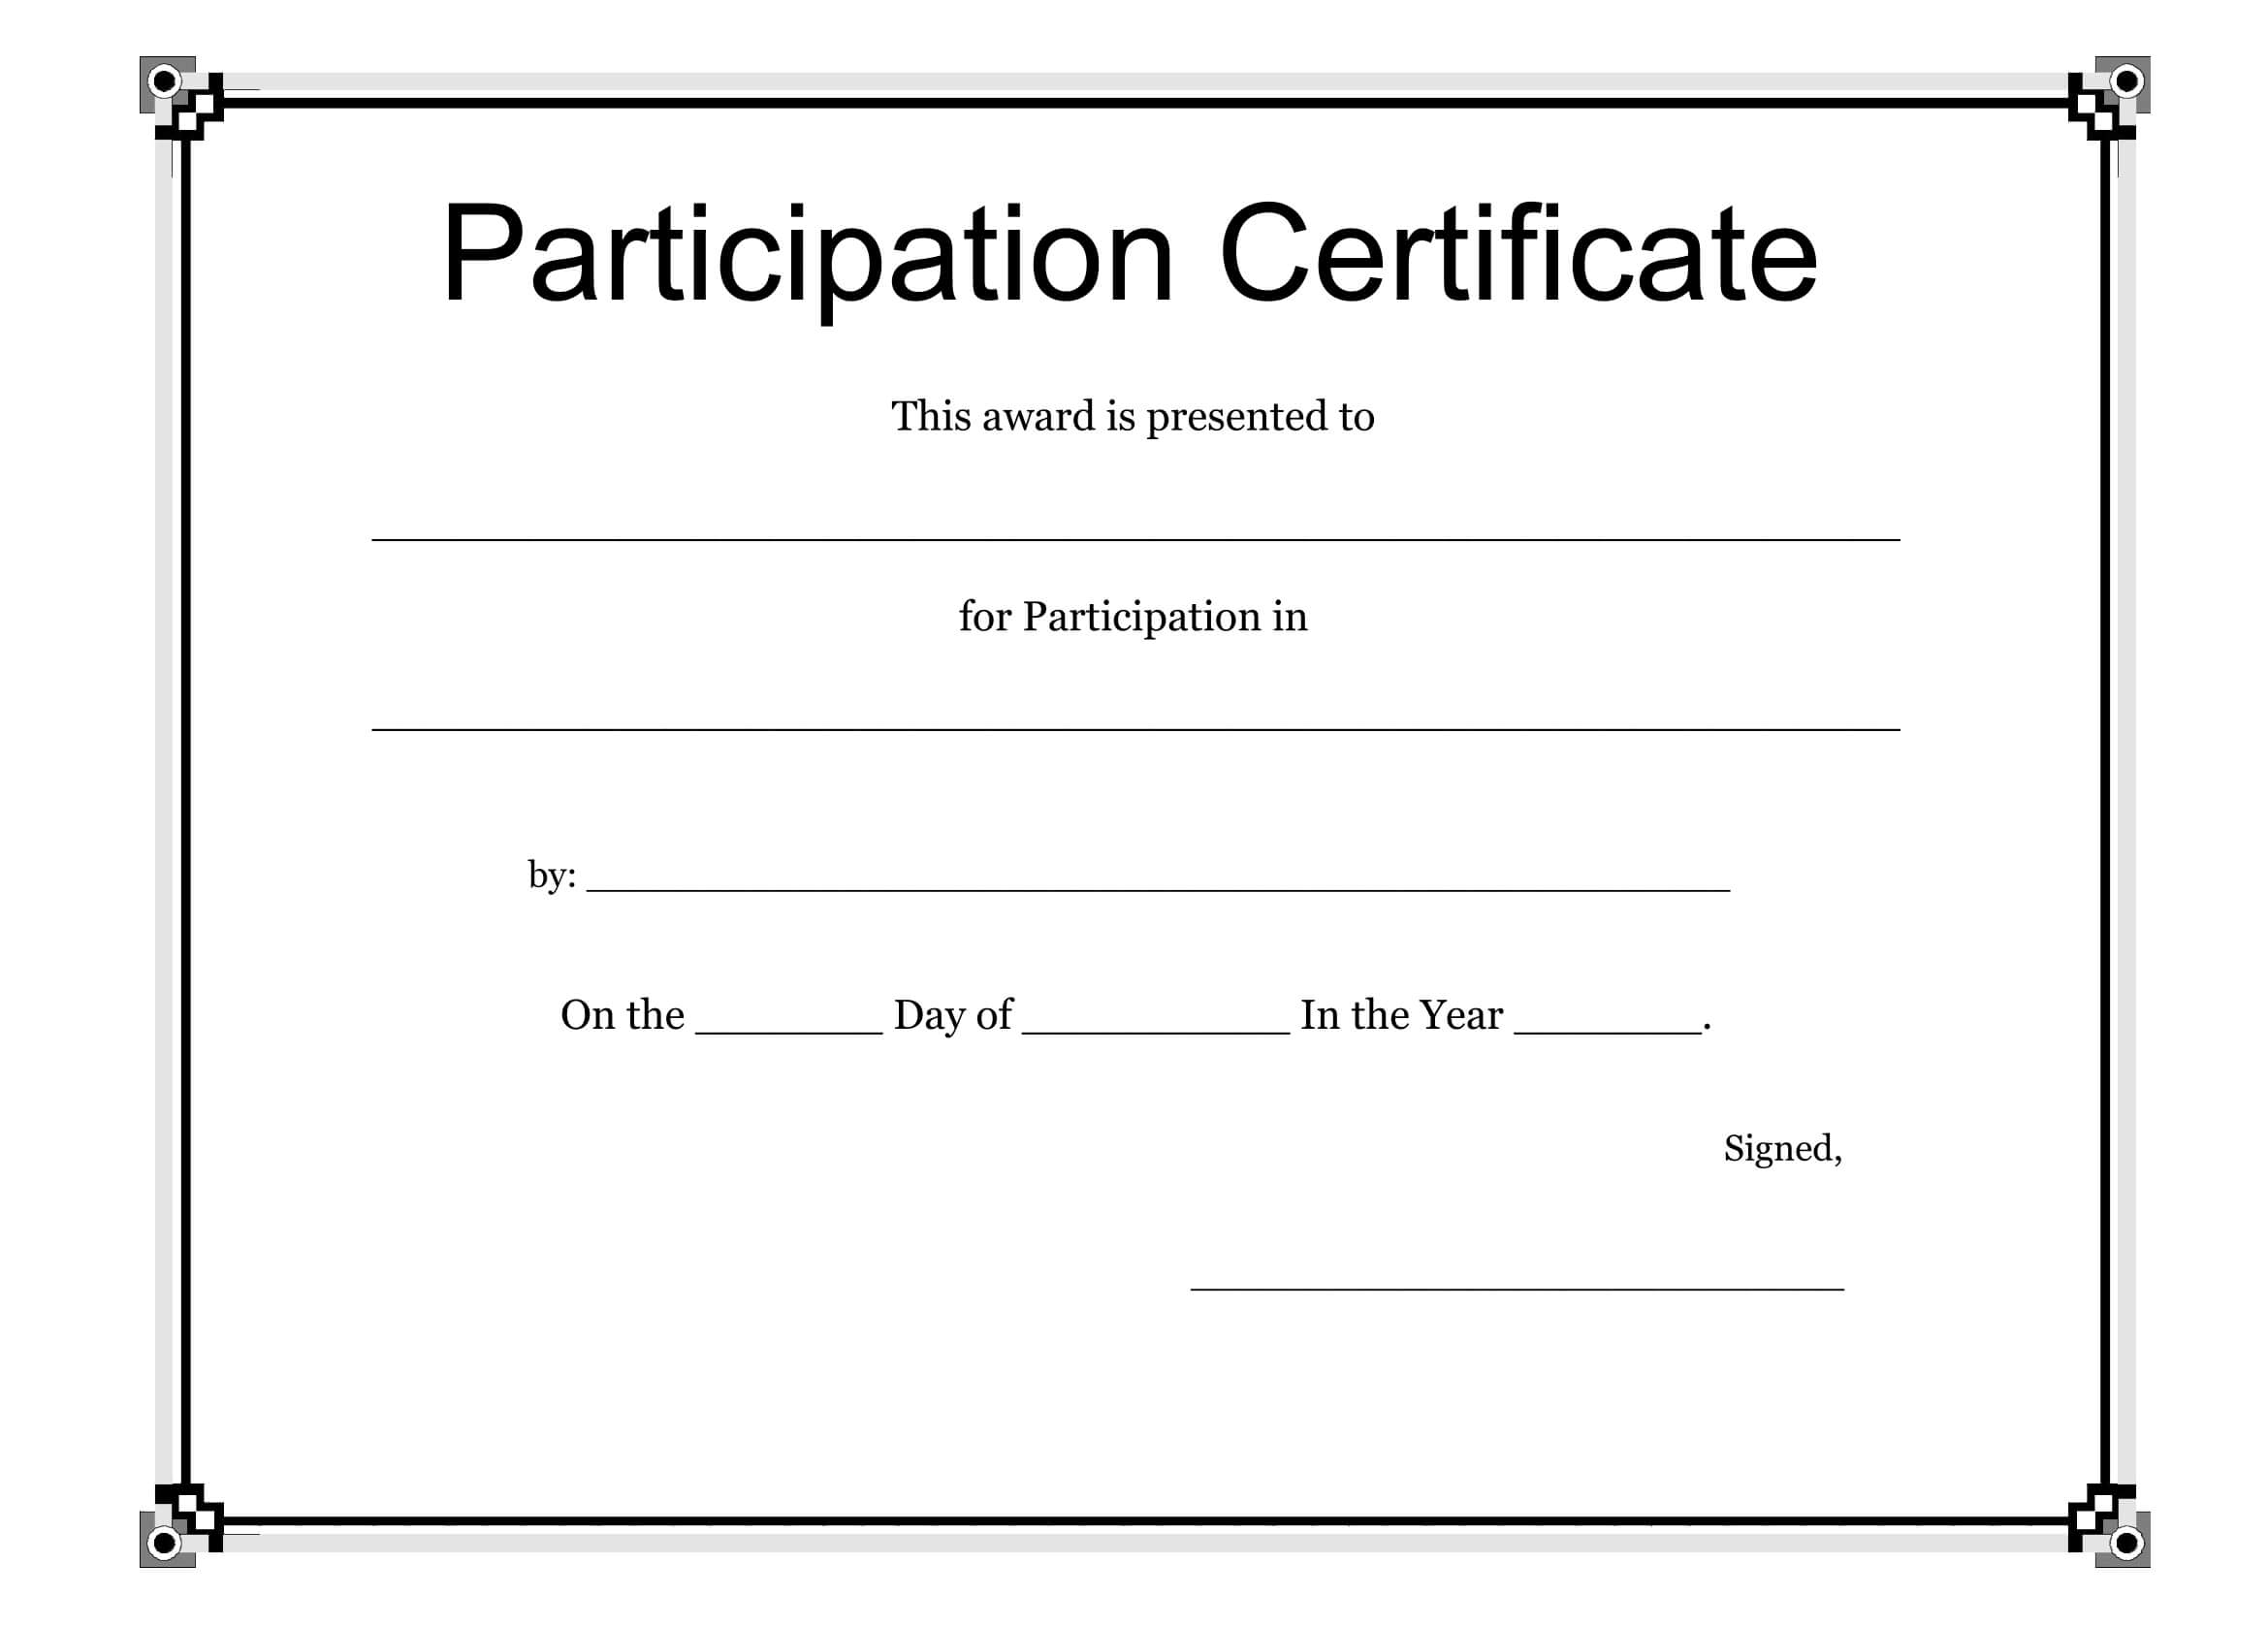 Participation Certificate Template – Free Download Regarding Participation Certificate Templates Free Download